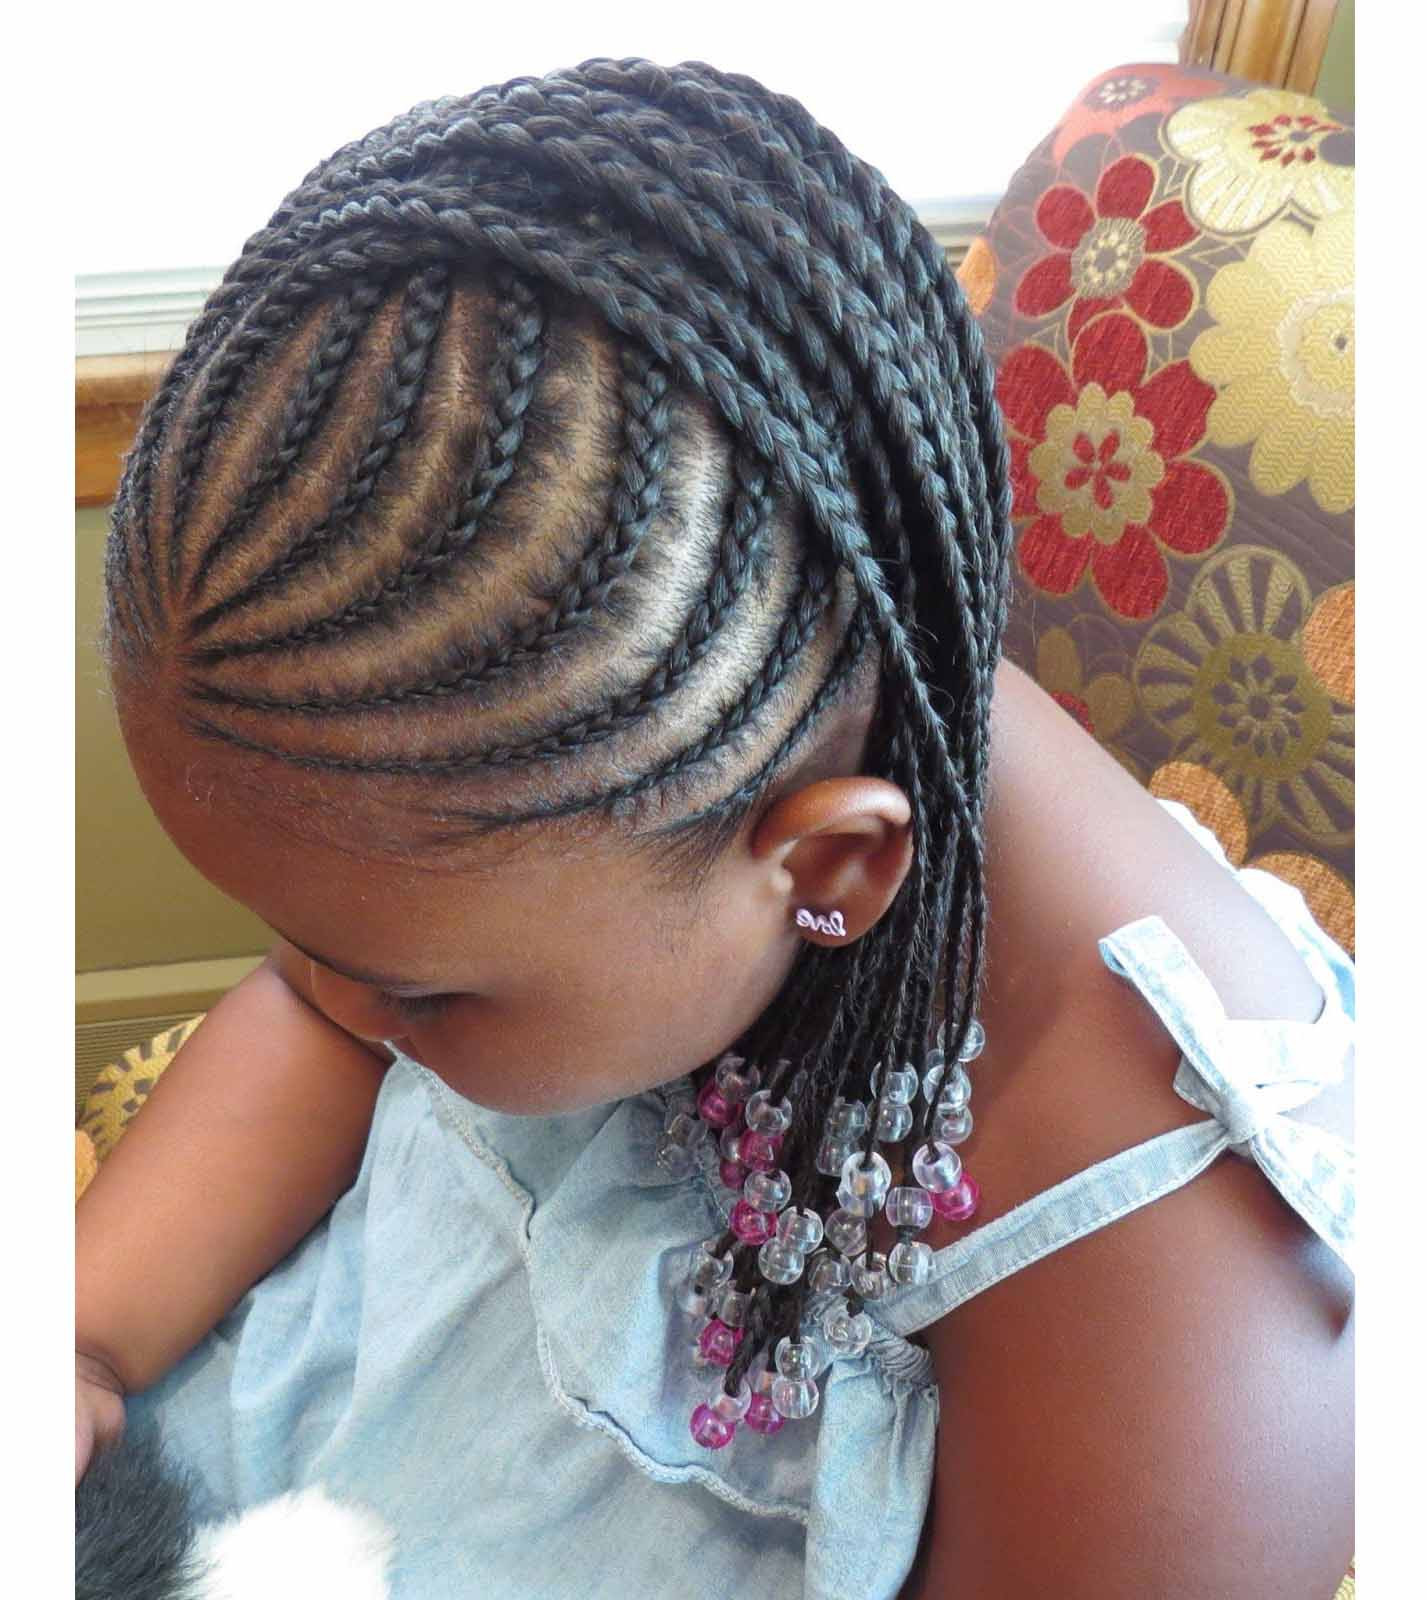 Girls Braided Hairstyles
 64 Cool Braided Hairstyles for Little Black Girls – Page 2